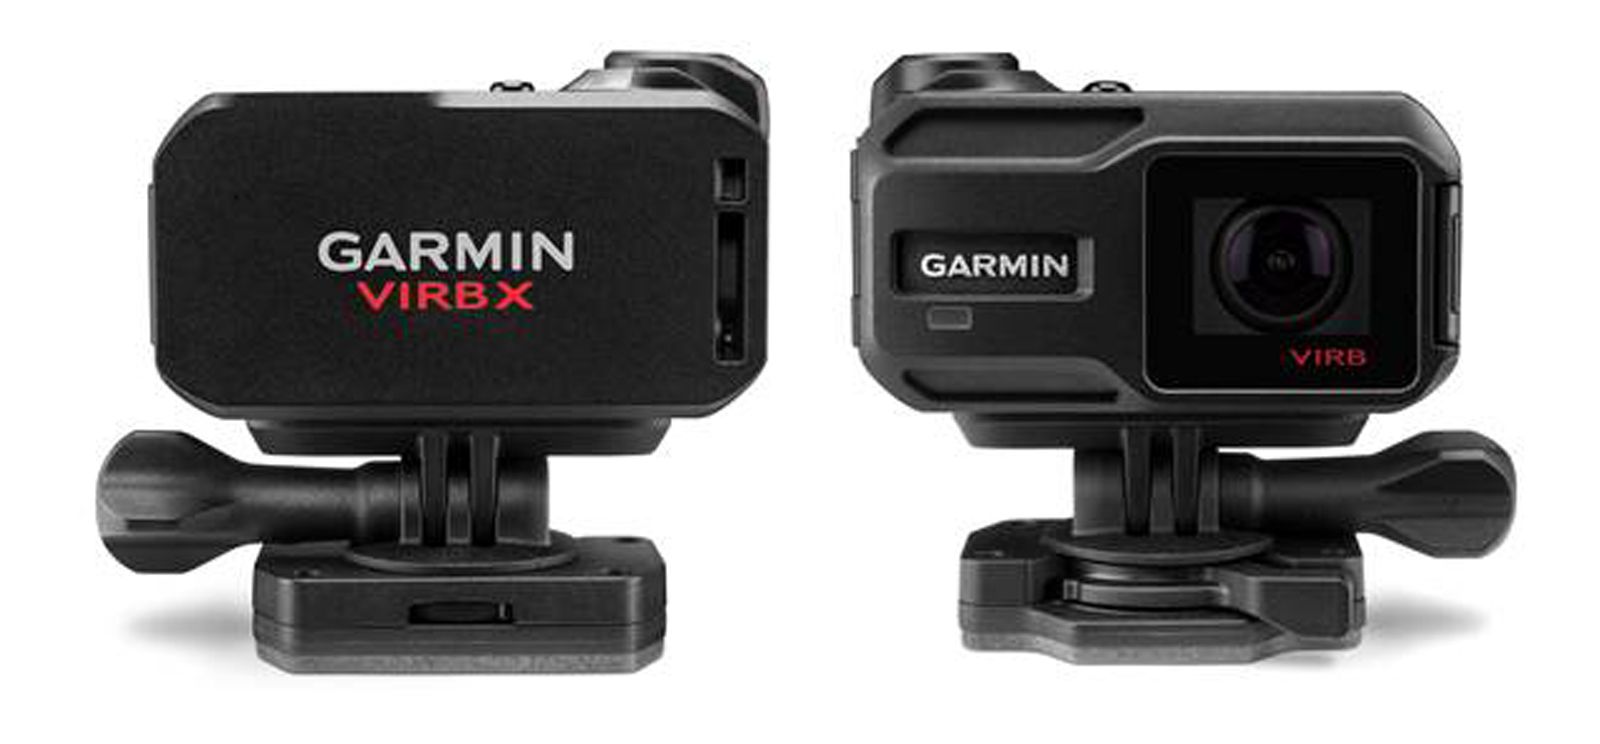 garmin virb x and virb xe action cameras are smarter and tougher gopro should worry image 1